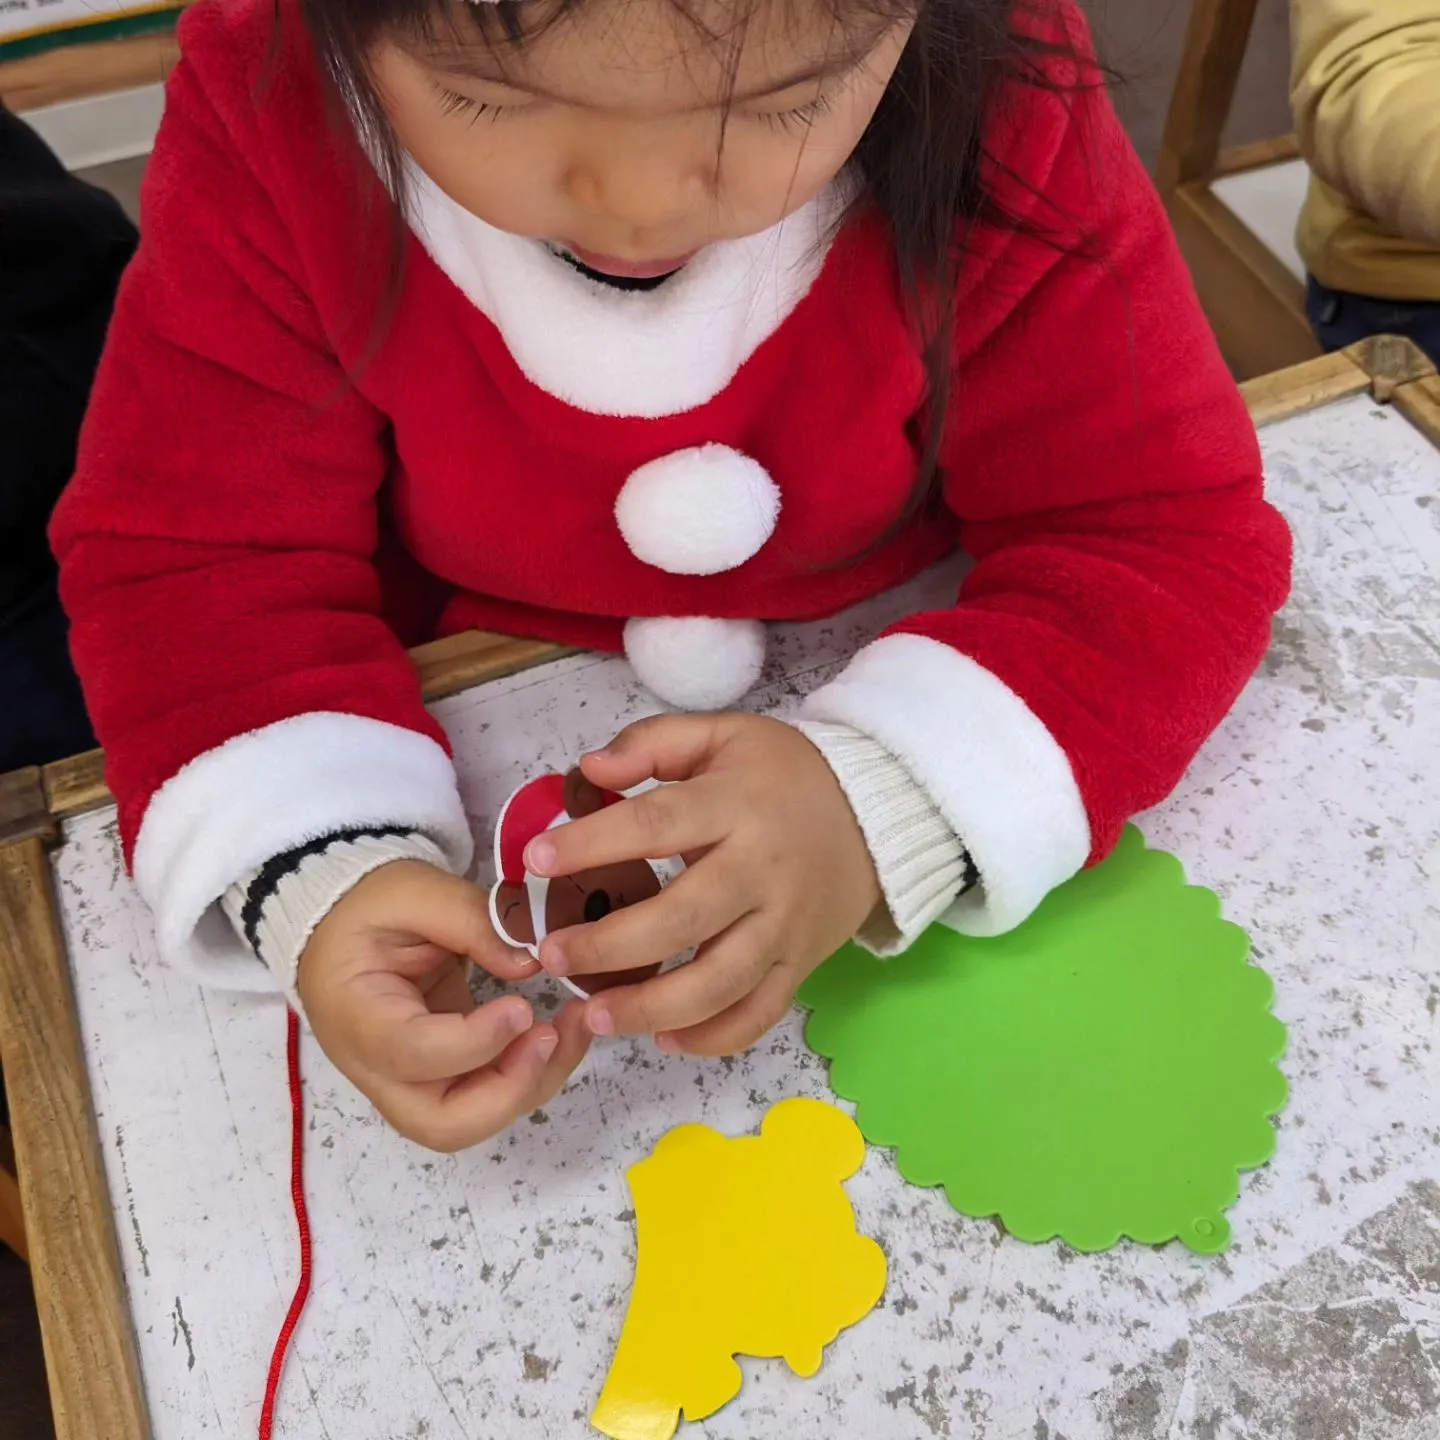 【North PK】Christmas Party